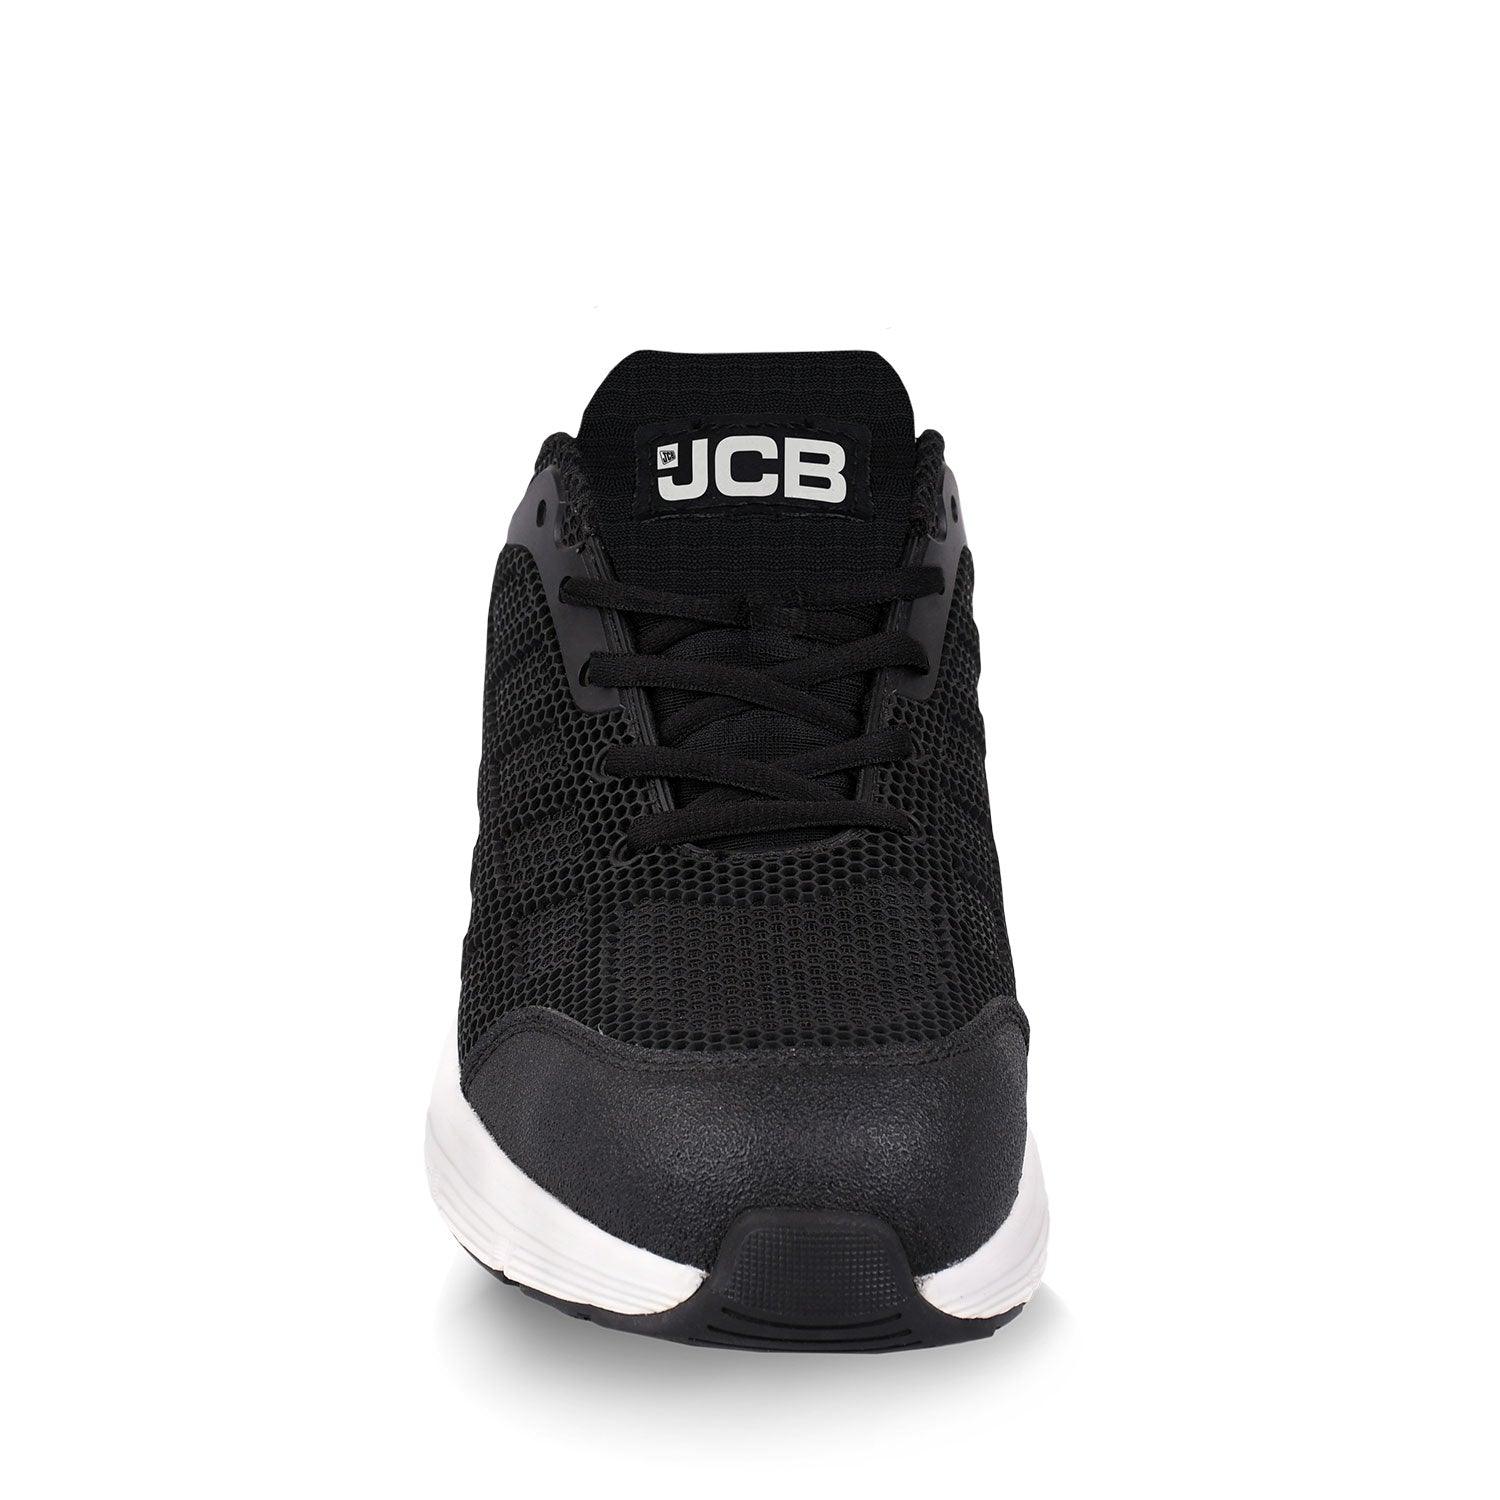 JCB Jogger Black/White Shoe Steel Toe - Premium Safety Boots from JCB Footwear - Just R 830! Shop now at Securadeal